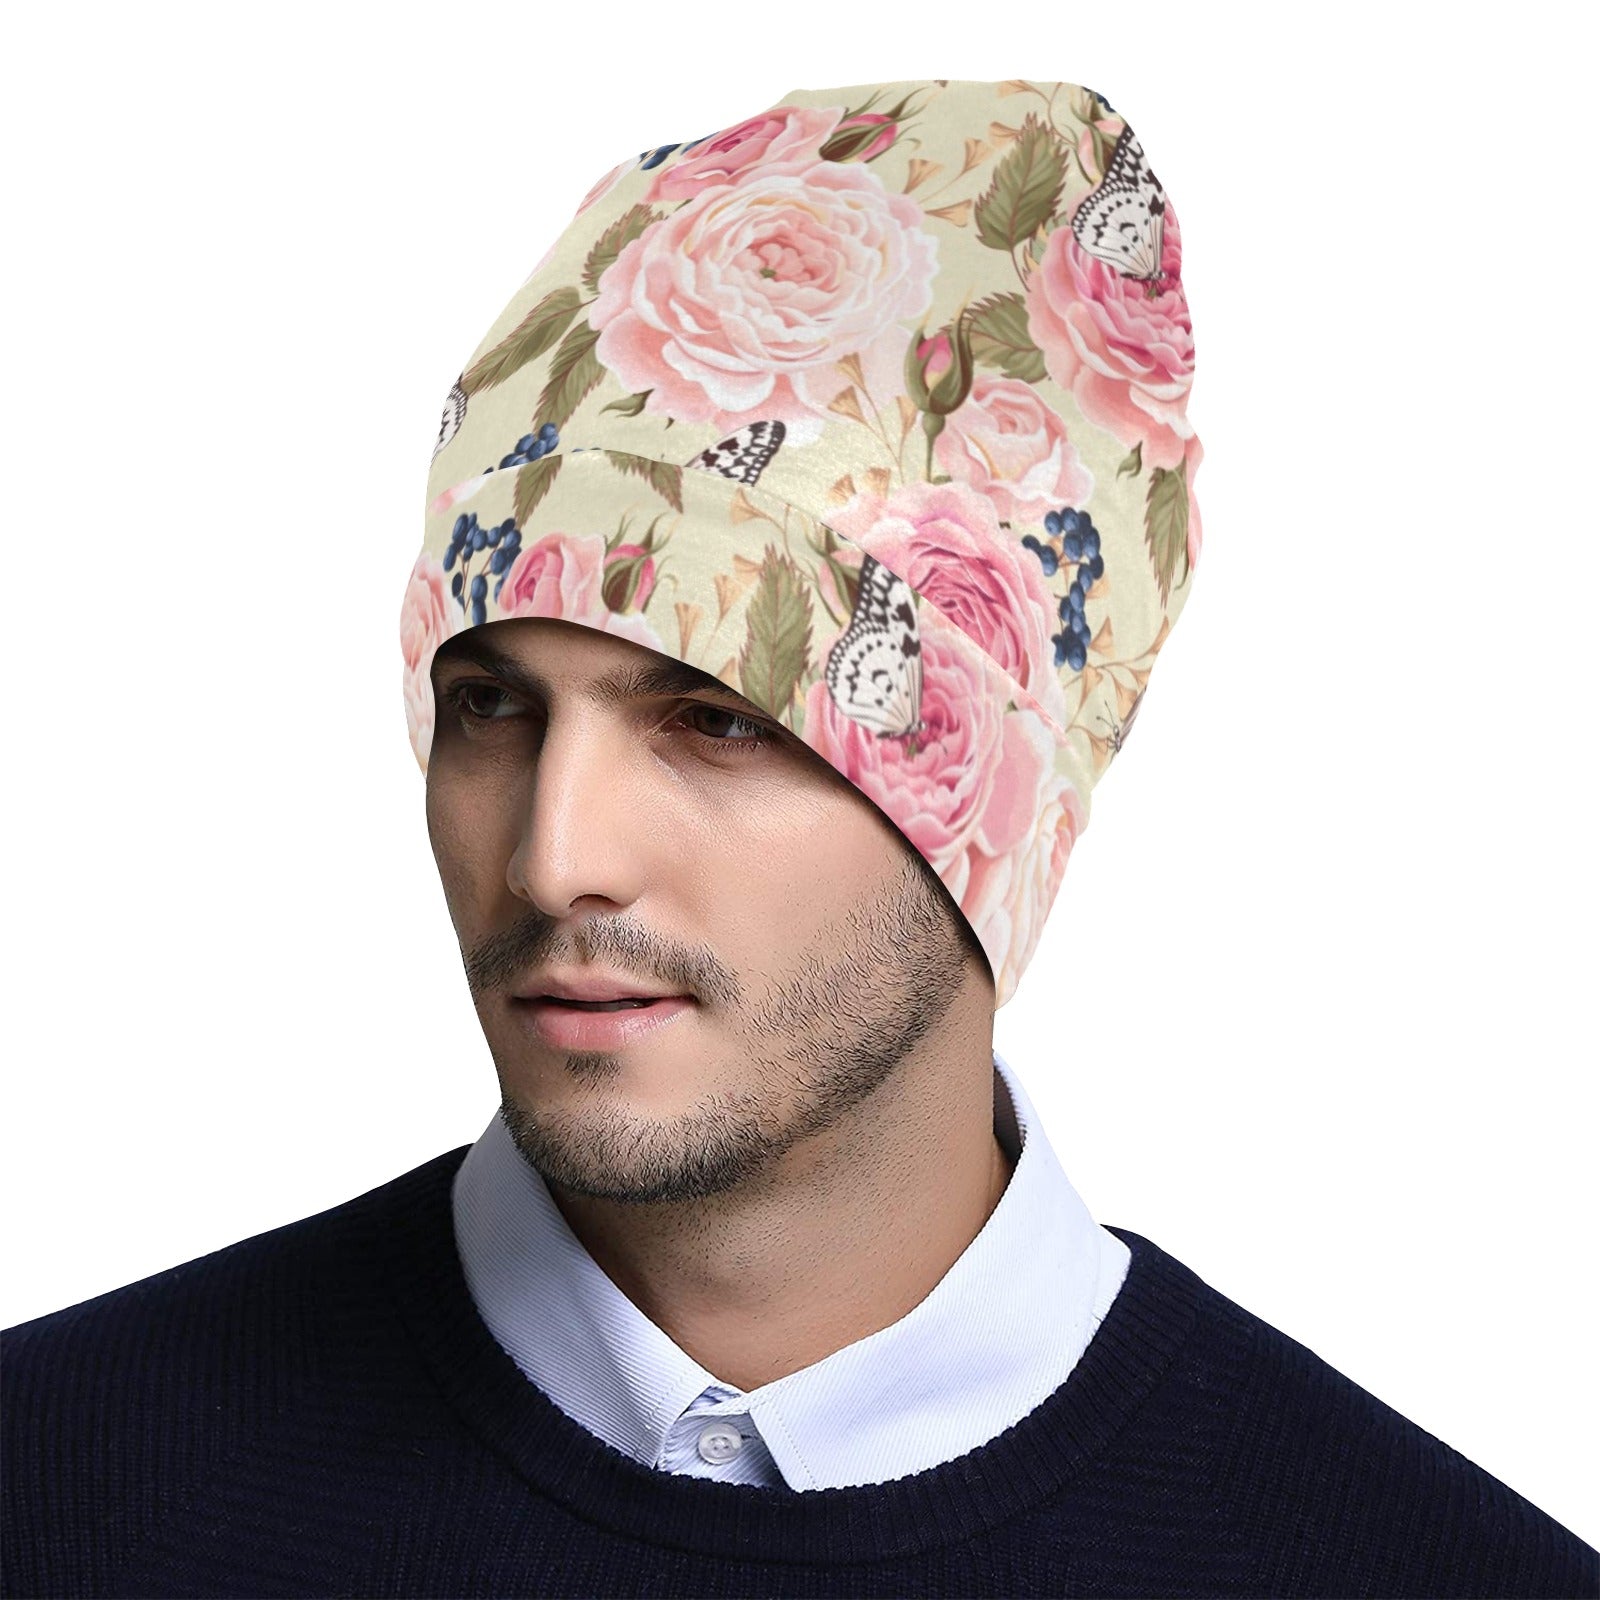 Floral Pink Butterfly Print Unisex Beanie